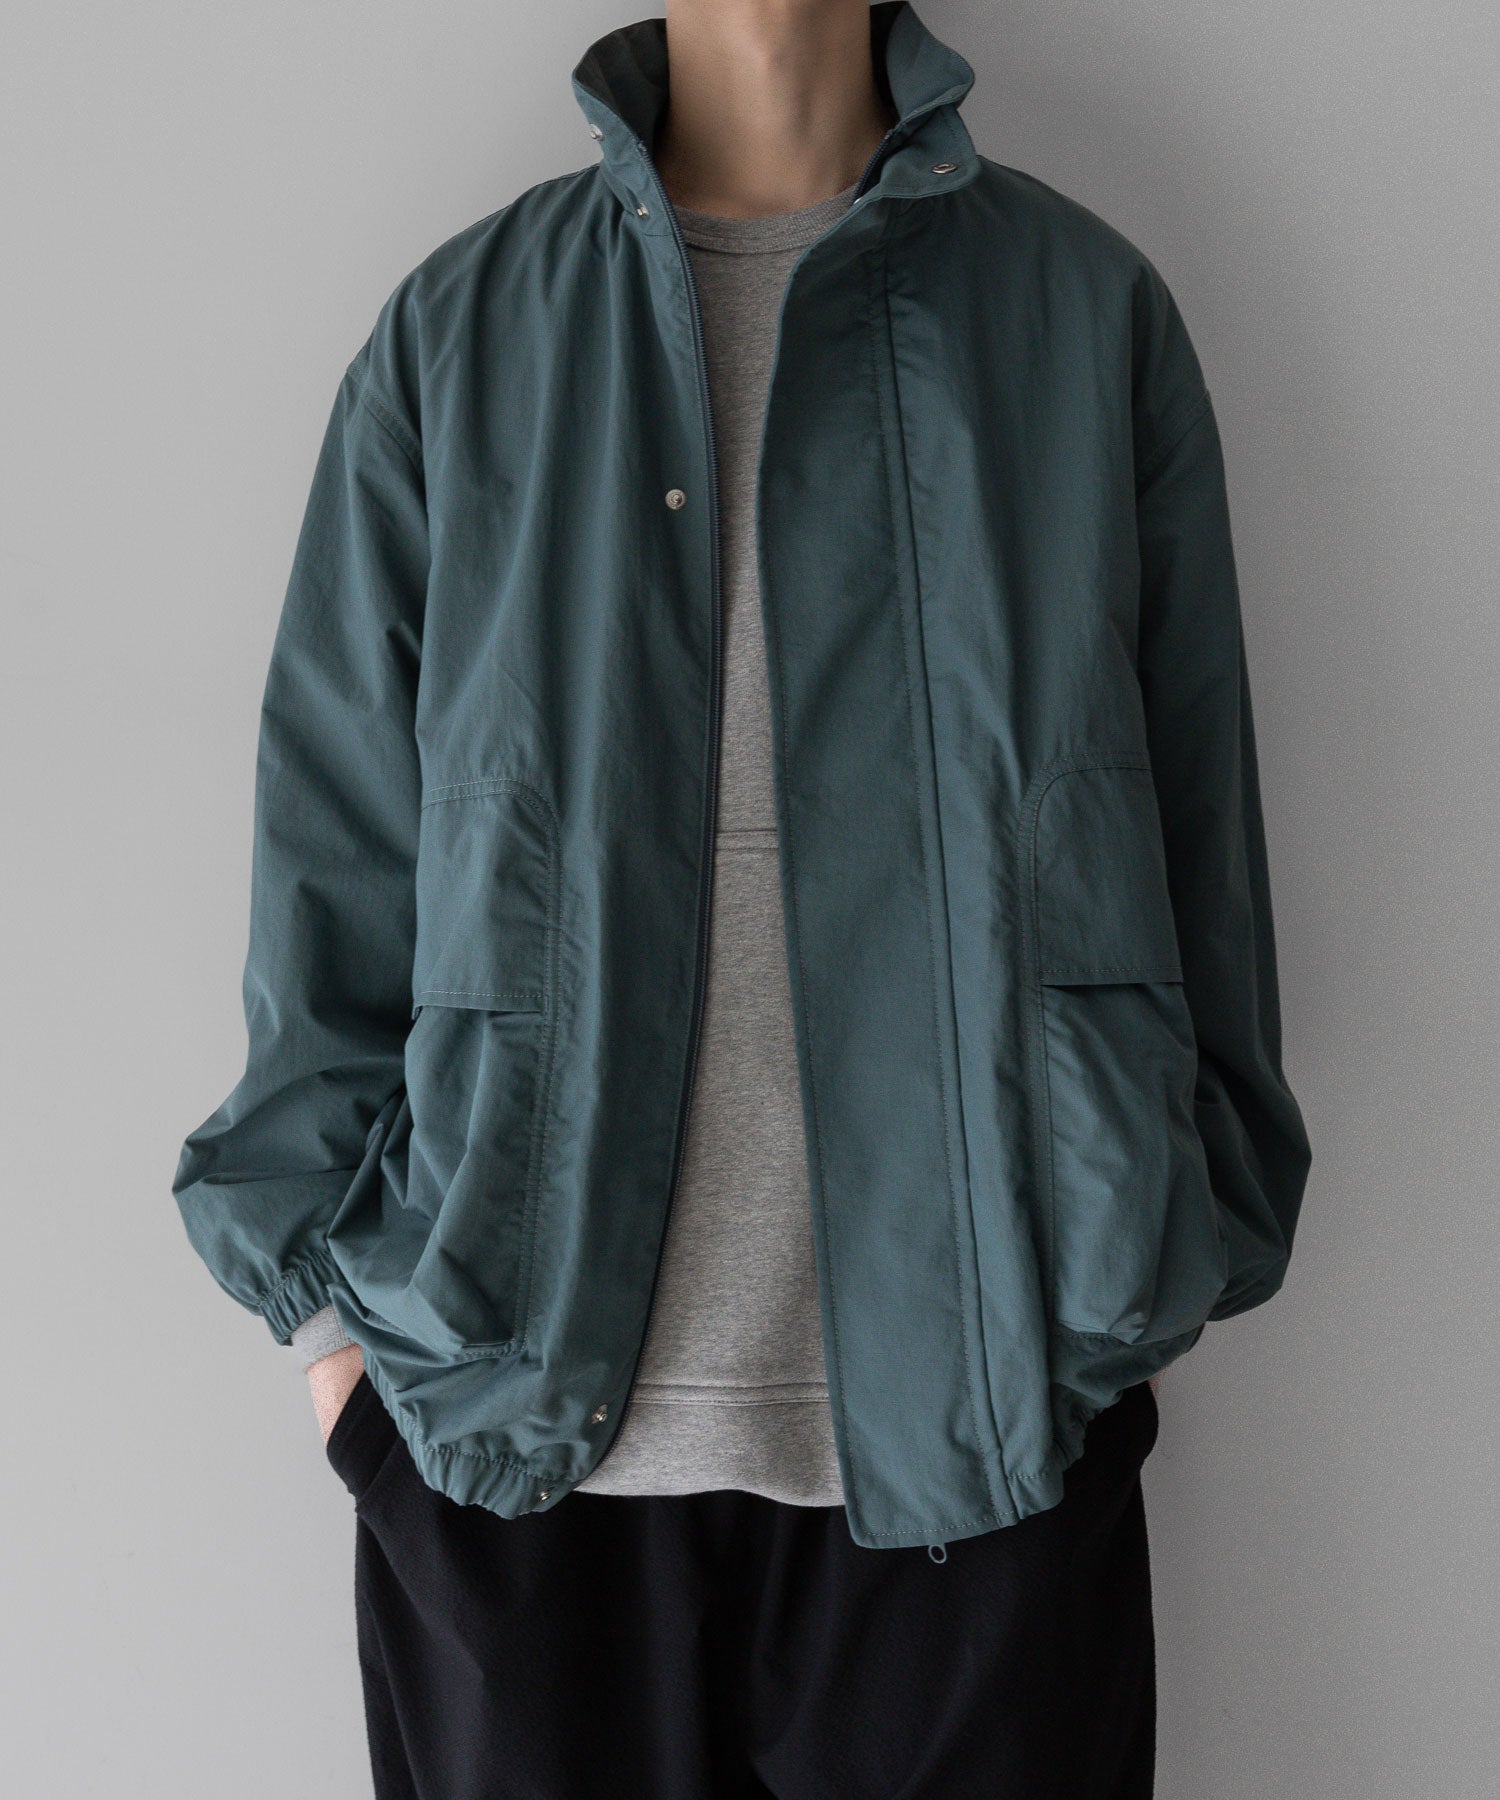 【NEITHERS】ネイダース ネイダスのUNDERCOVER COACH JACKET - SAGE GREEN公式通販サイトsession福岡セレクトショップ